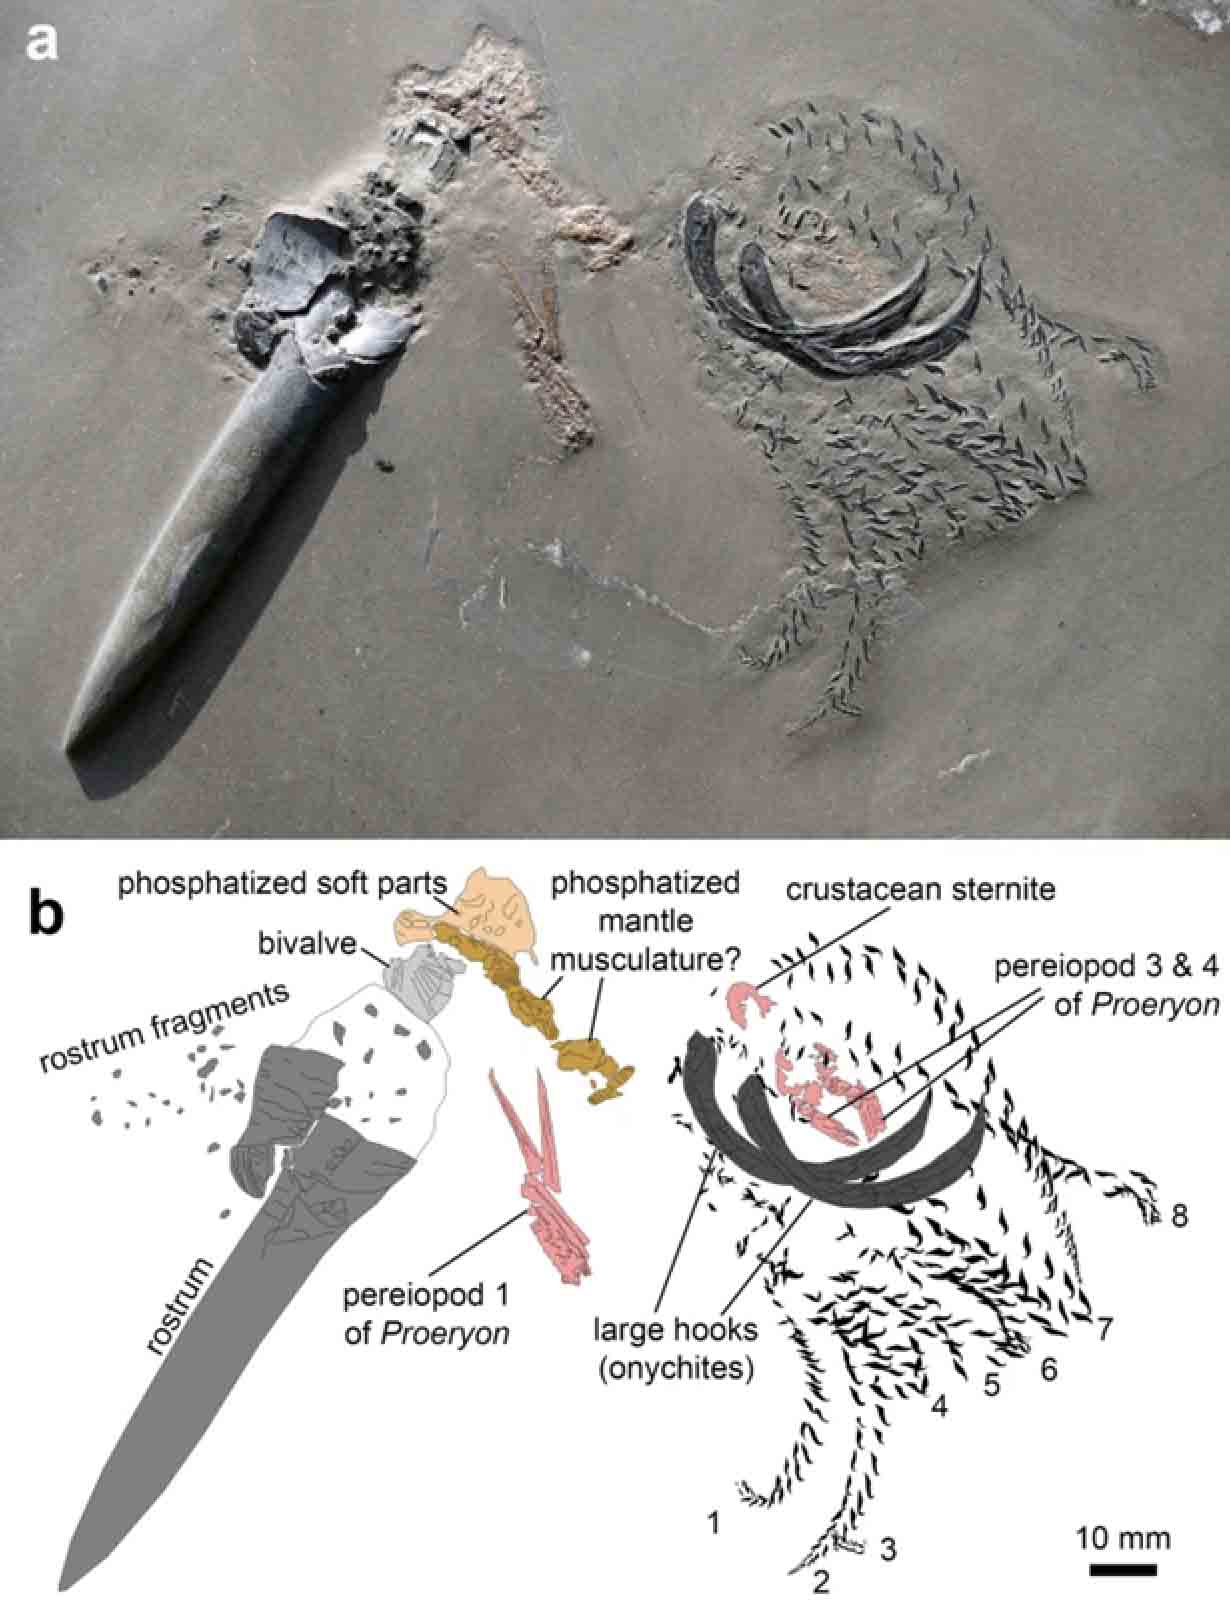 a) A photo of the Jurassic era fossil specimen and its prey. b) Camera lucida drawing based on a). (Swiss Journal of Palaeontology)